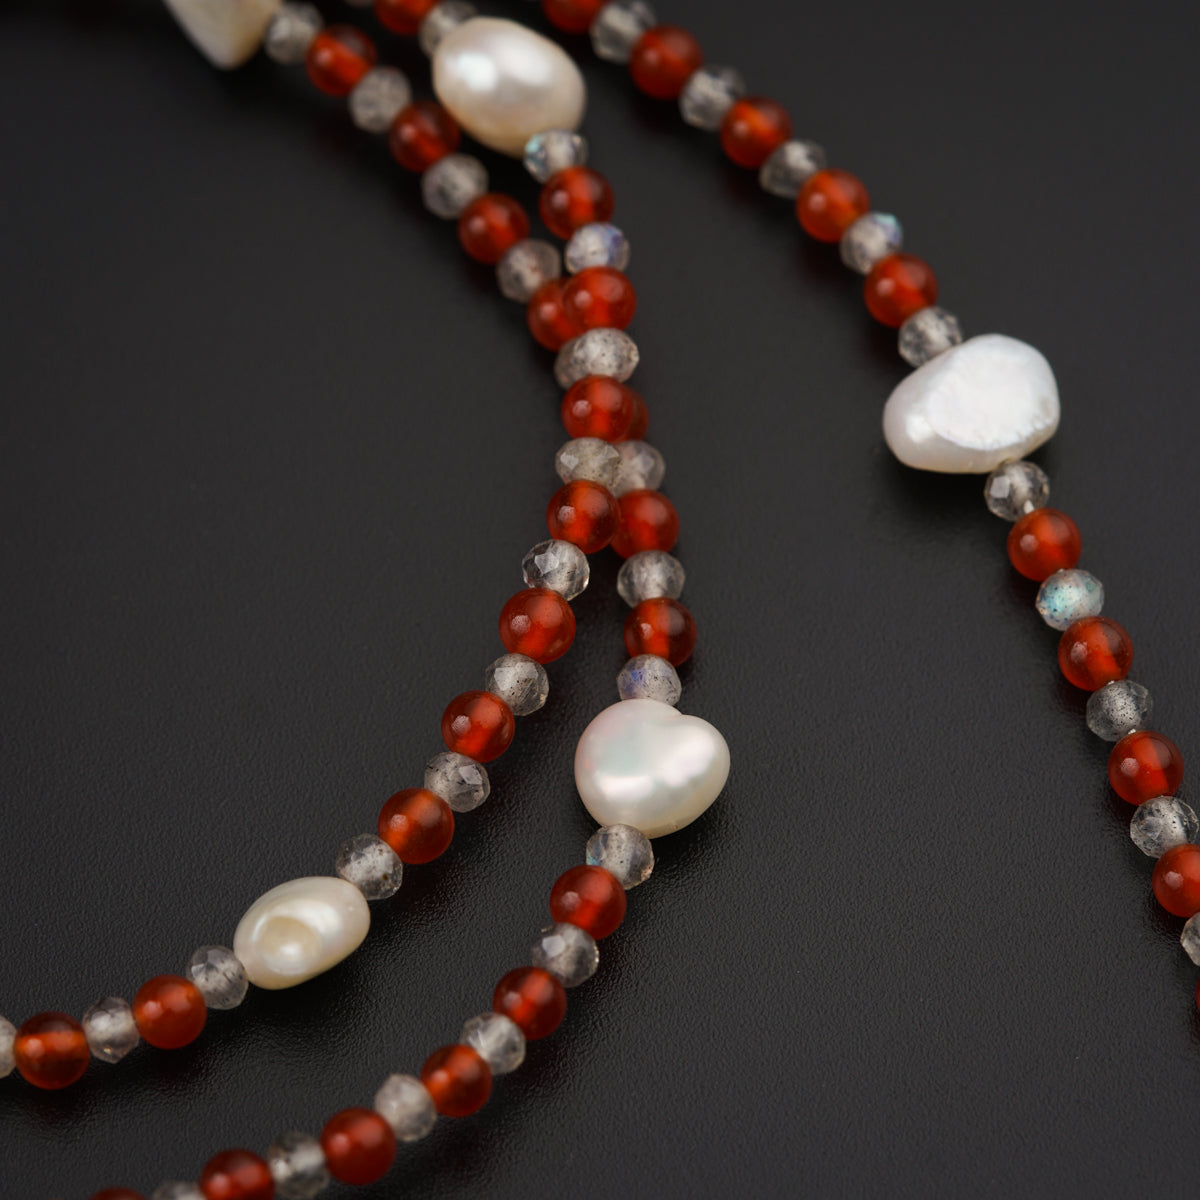 a long necklace with red and white beads